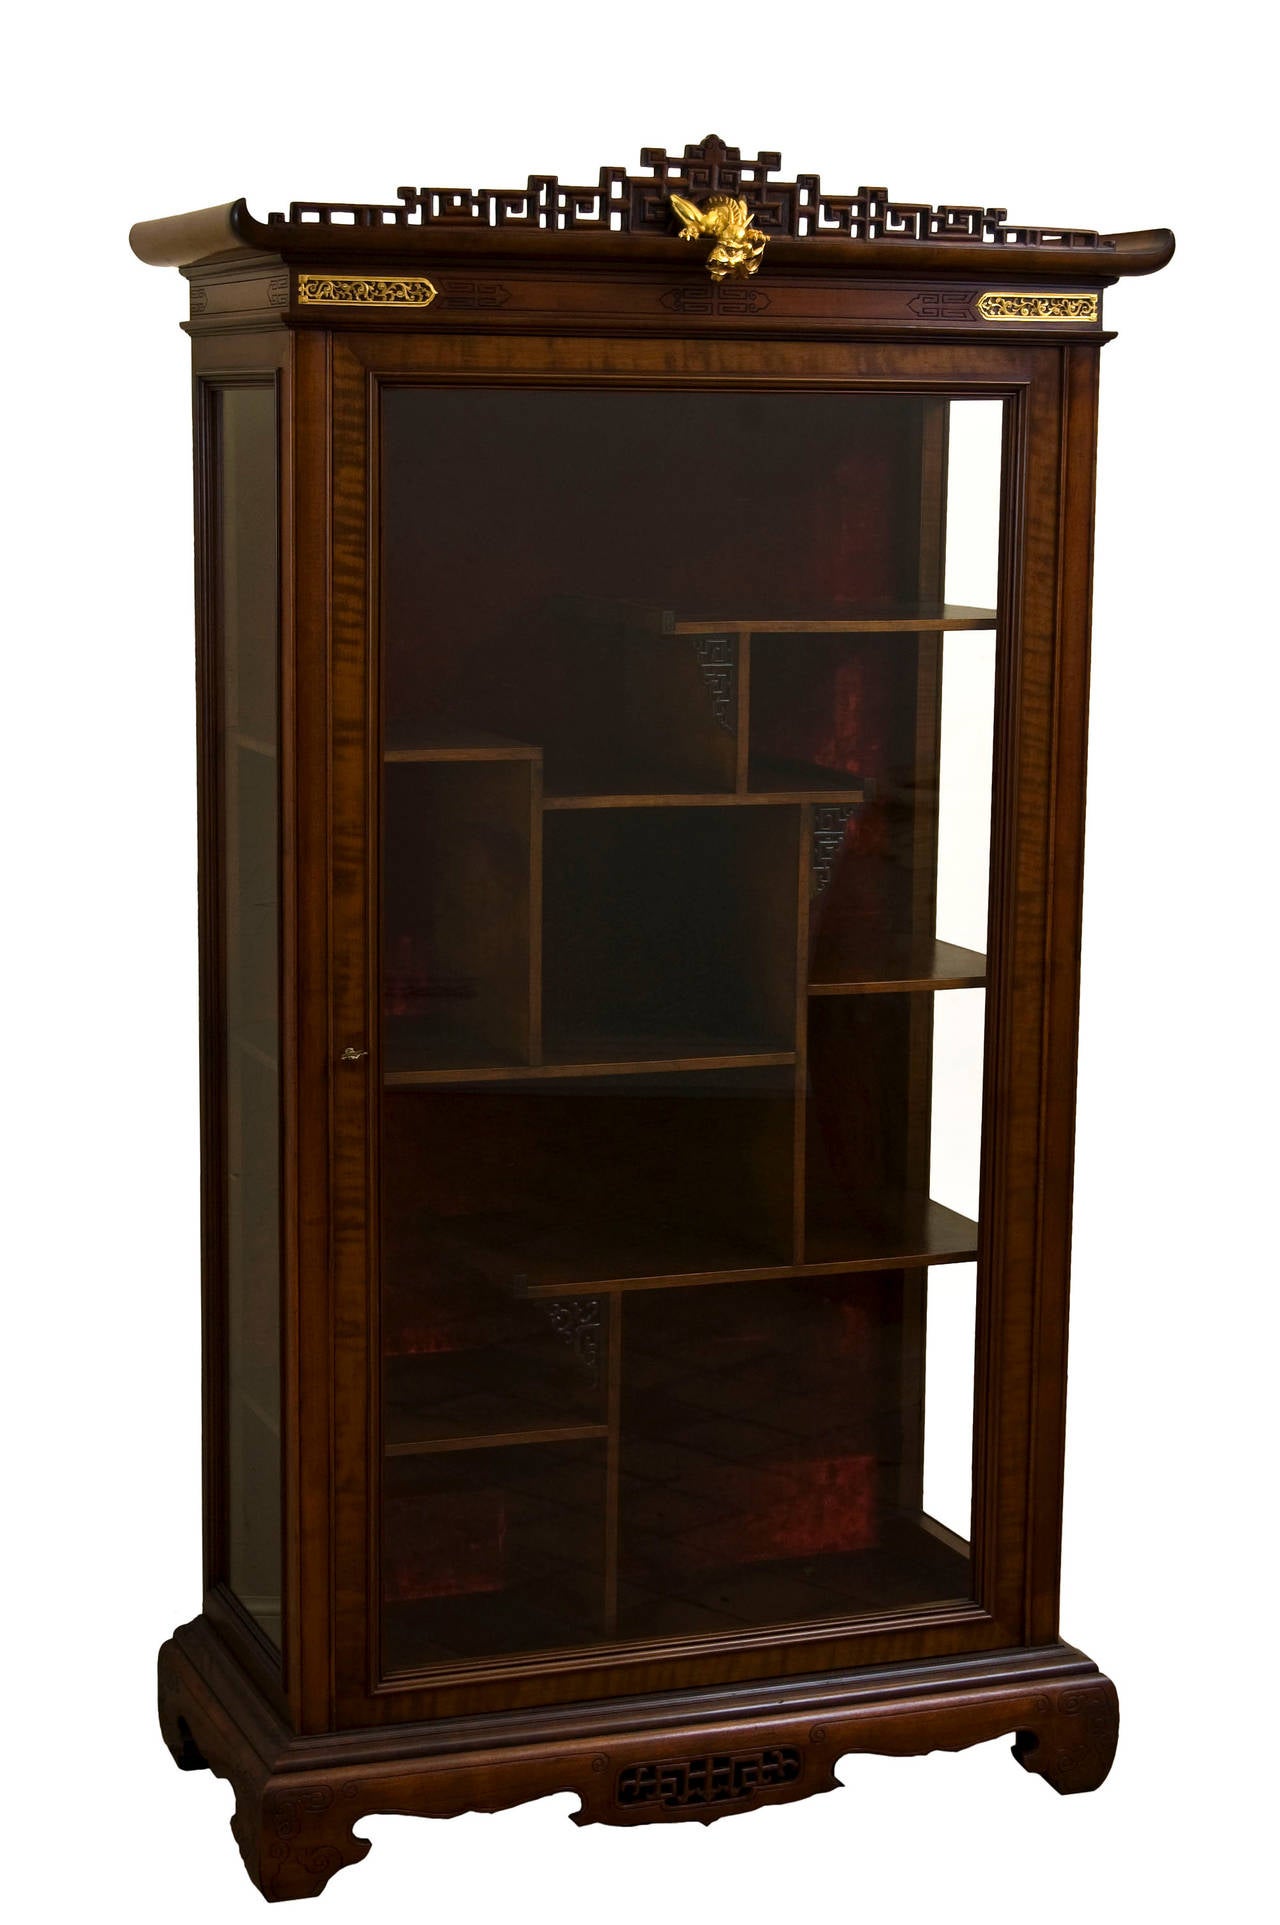 Japanese style presentation showcase in maple sycomore. The front opens with a large glass door, and both sides are on glass. At the top a carved grid cornice decor from which comes out a gilded bronze dragon. Inside a set of asymmetric storage